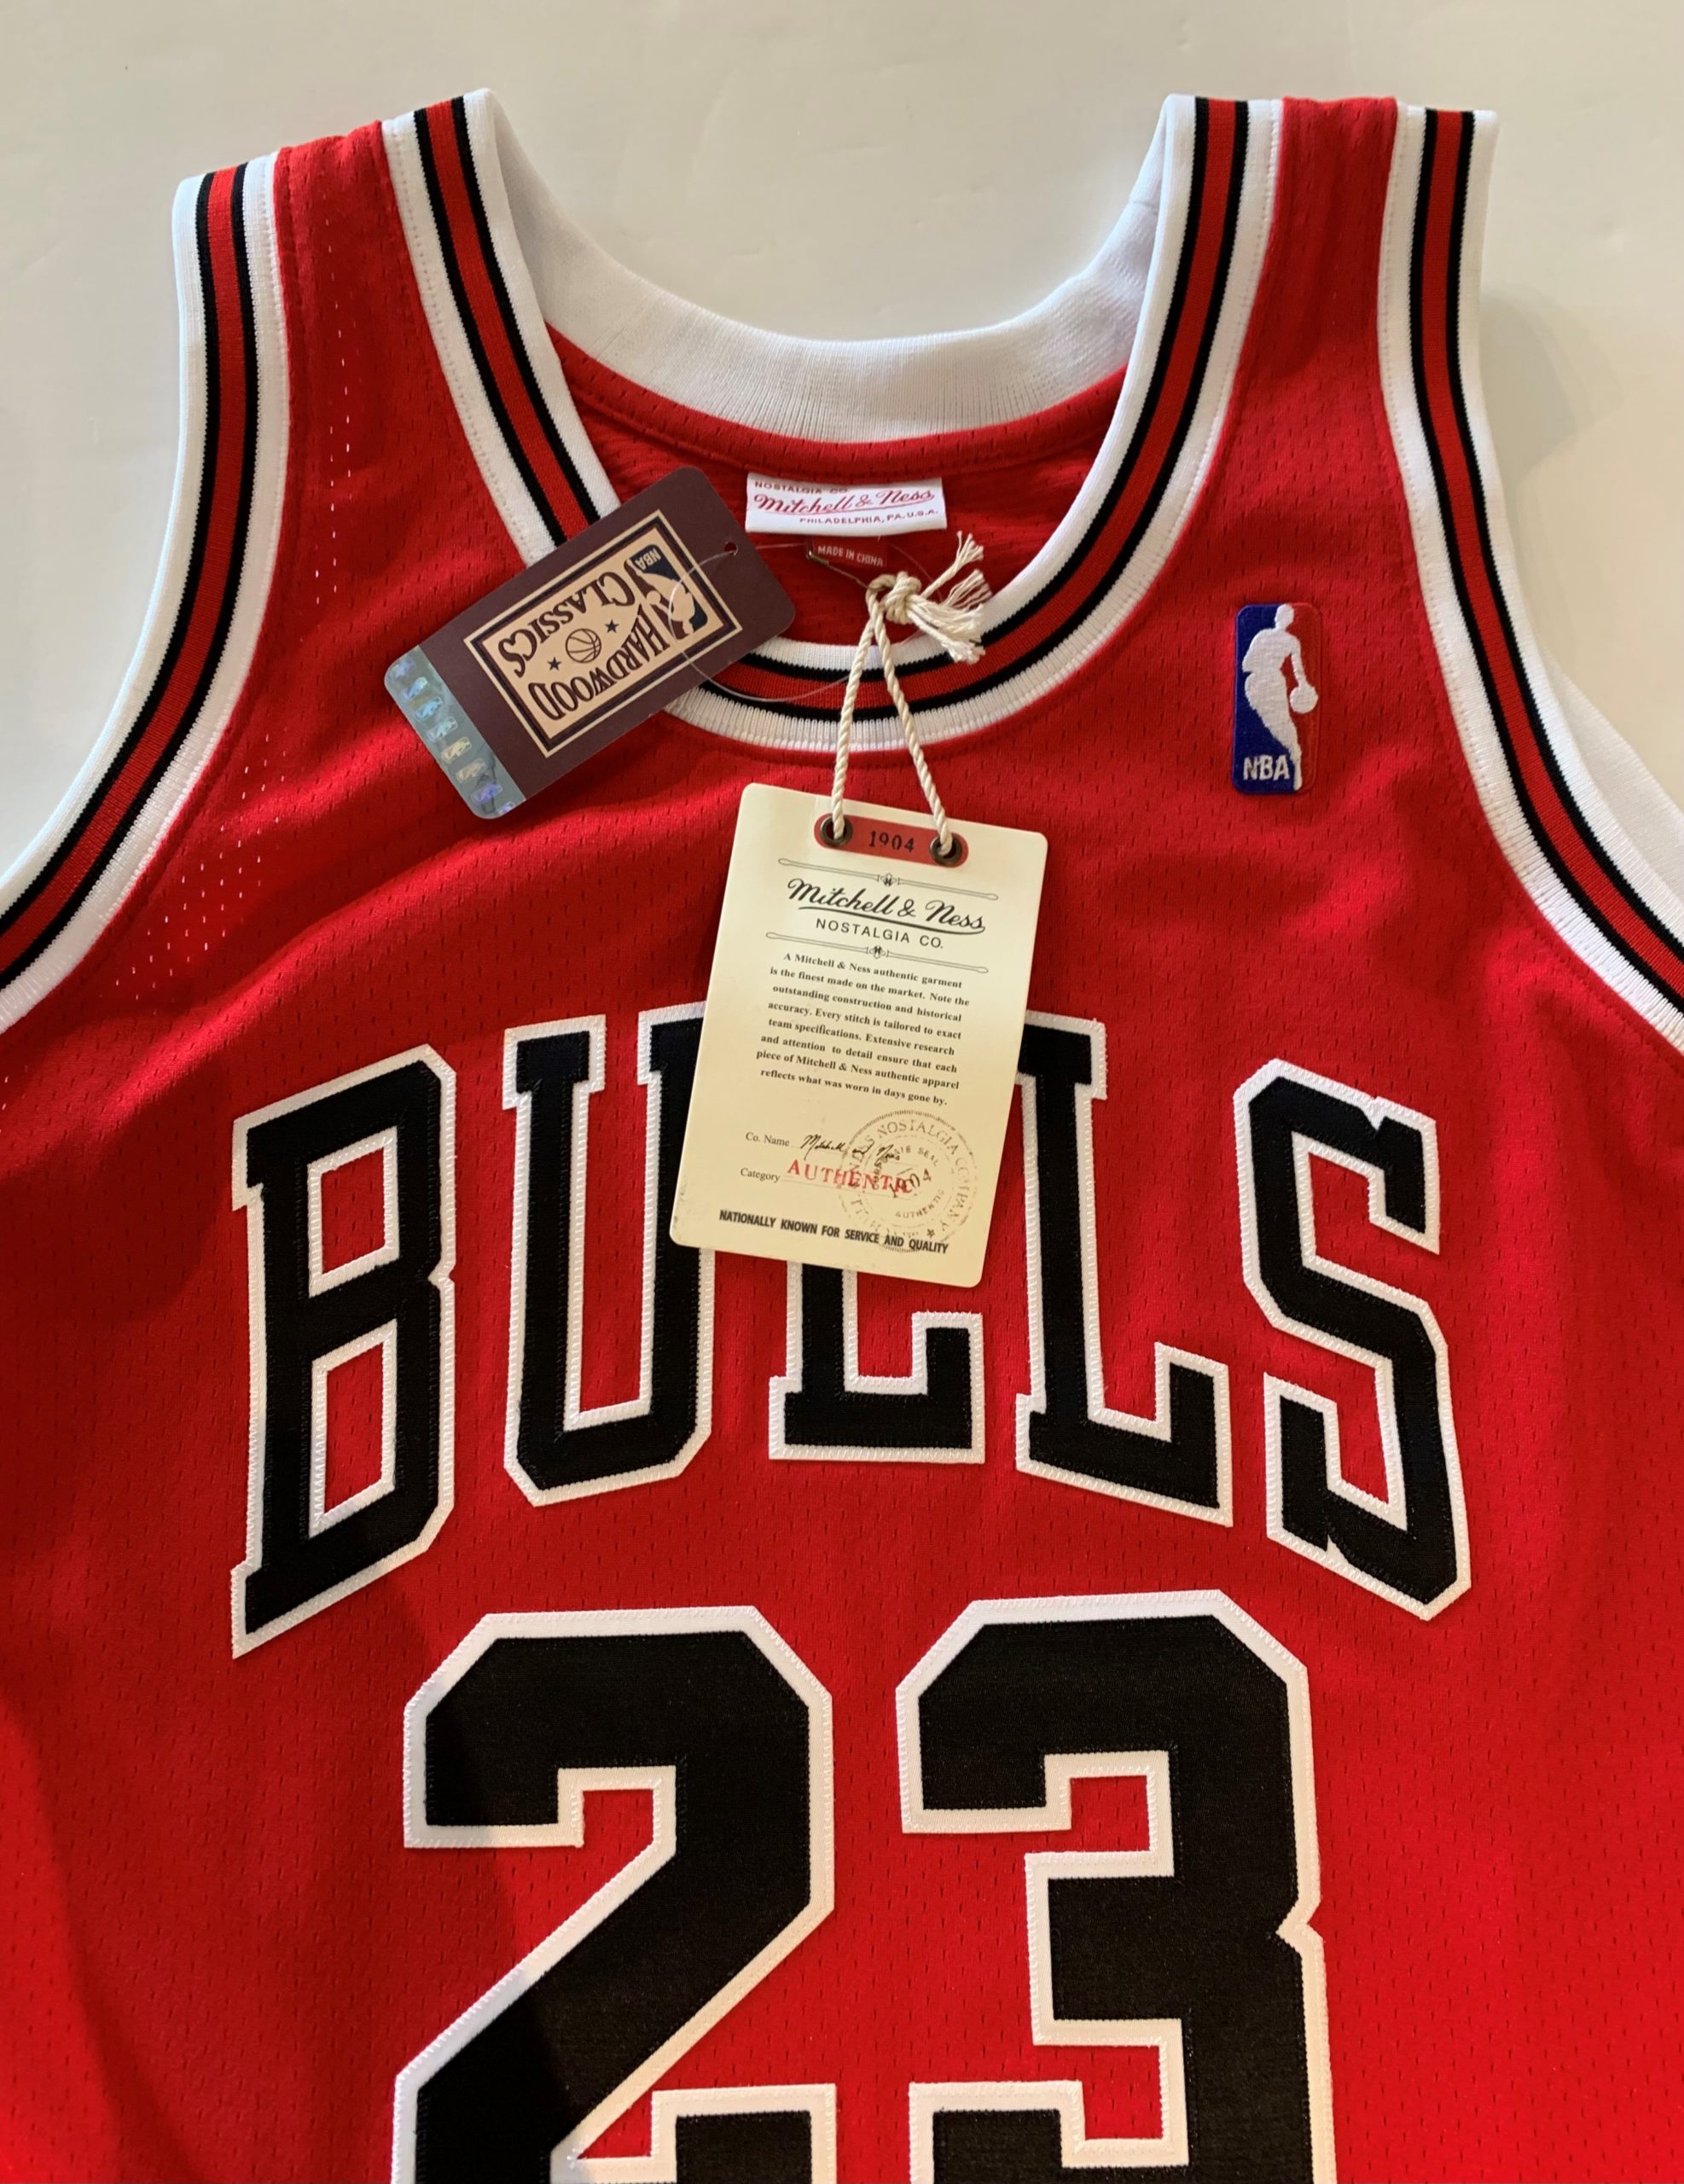 Michael Jordan Jerseys and Apparel from Mitchell & Ness Mitchell & Ness  Nostalgia Co.